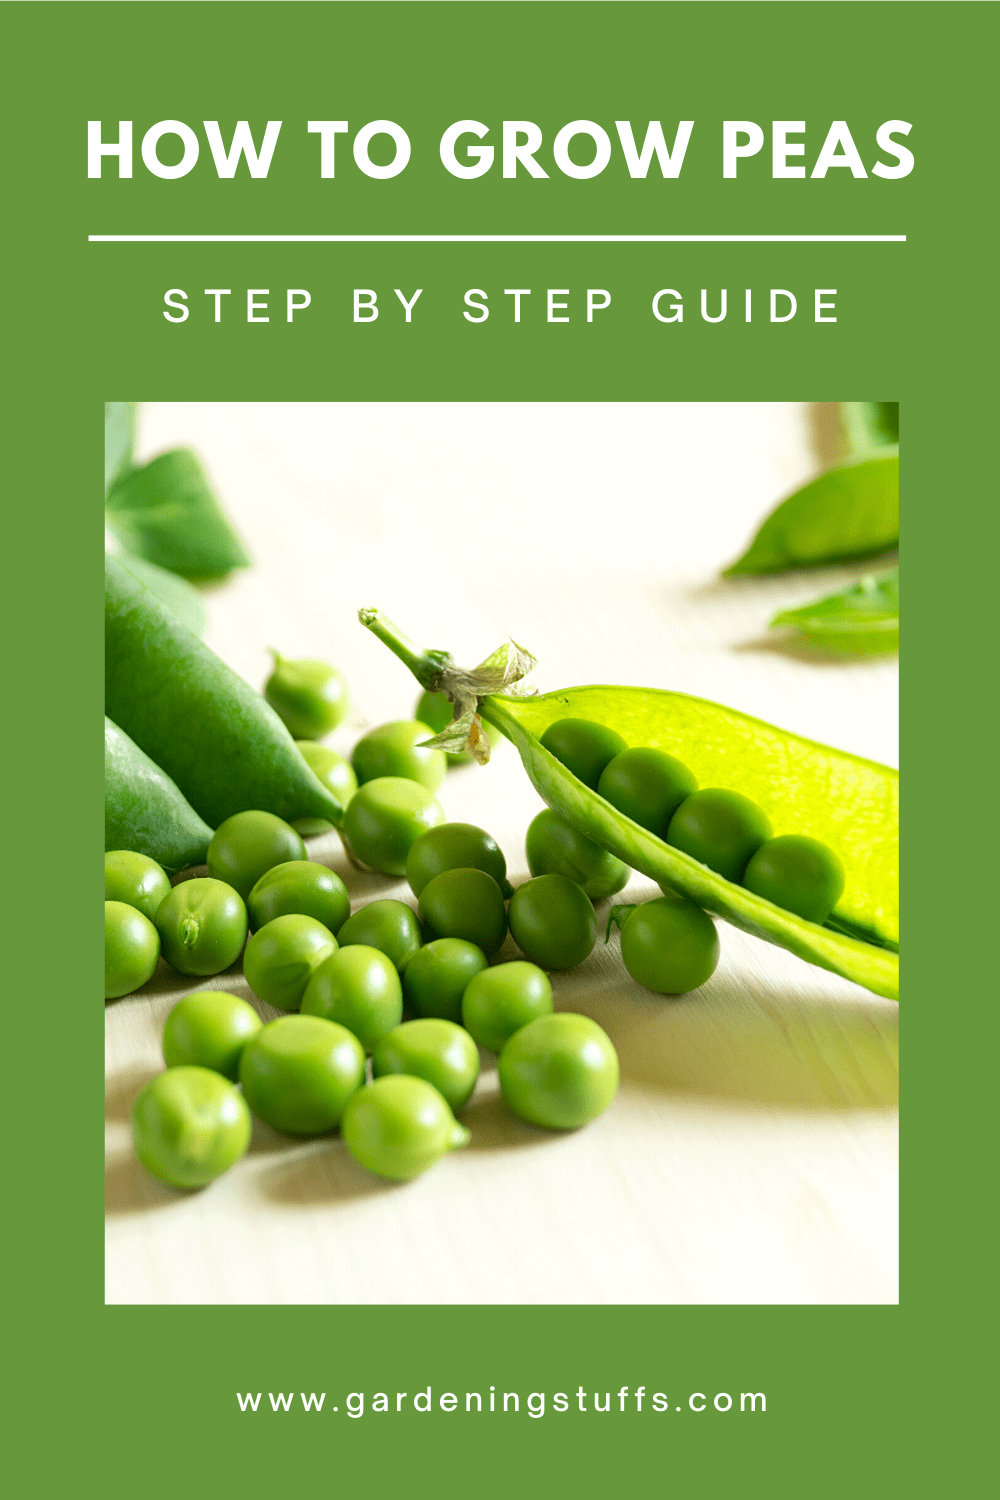 This step by step guide on how to grow peas walks you through the process, making it easy for you to learn how to plant, care for, and harvest your peas.